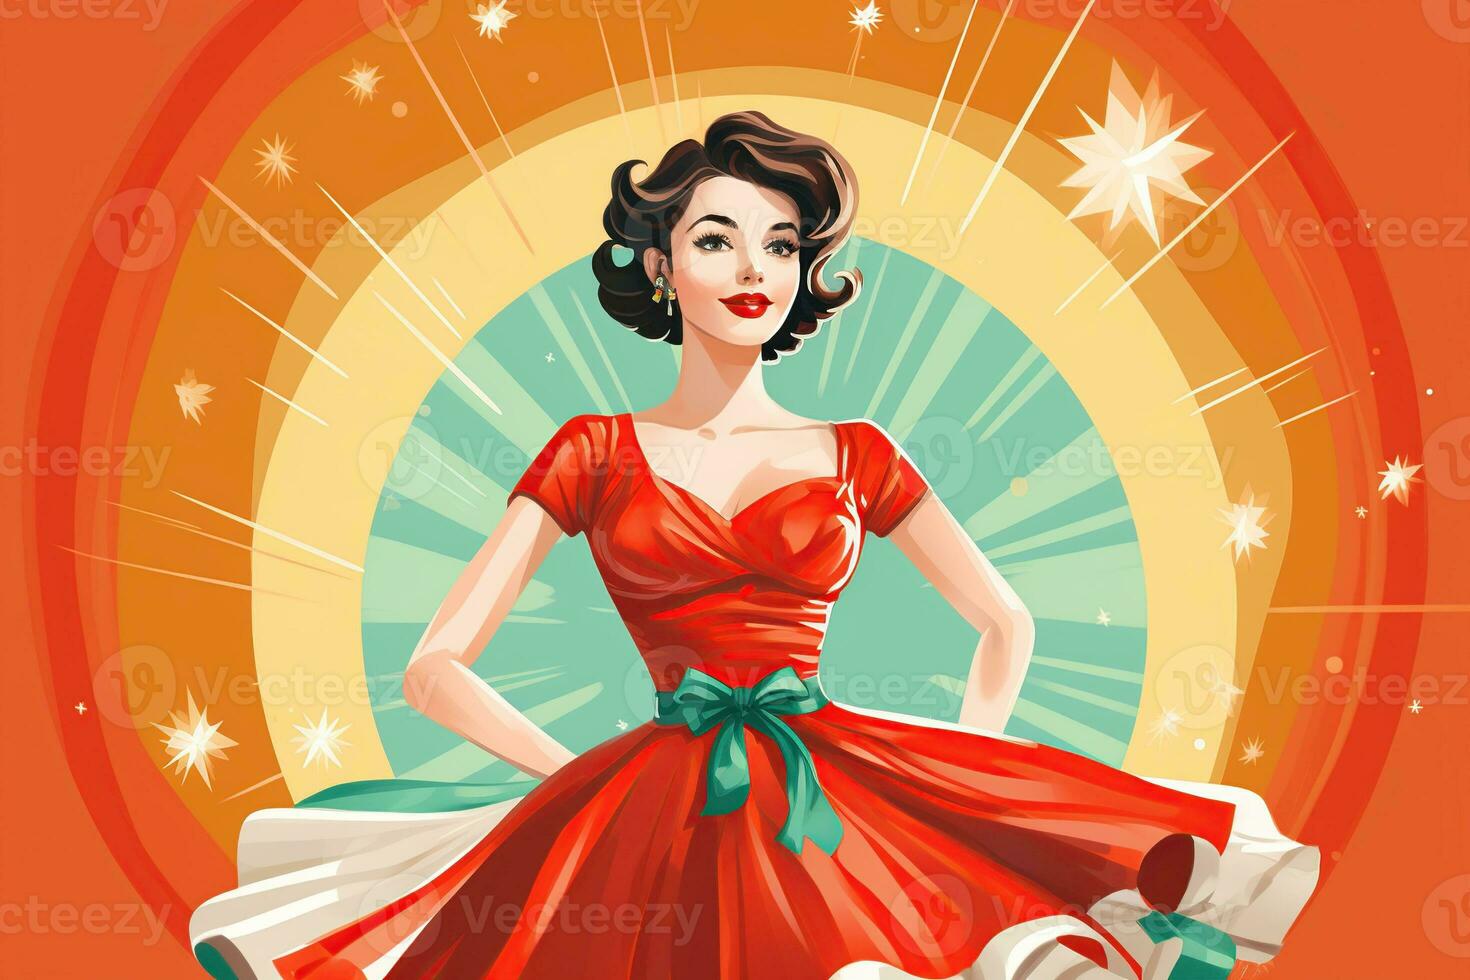 Retro illustration of a girl's New Year's Eve costume inspired by 1950s fashion photo